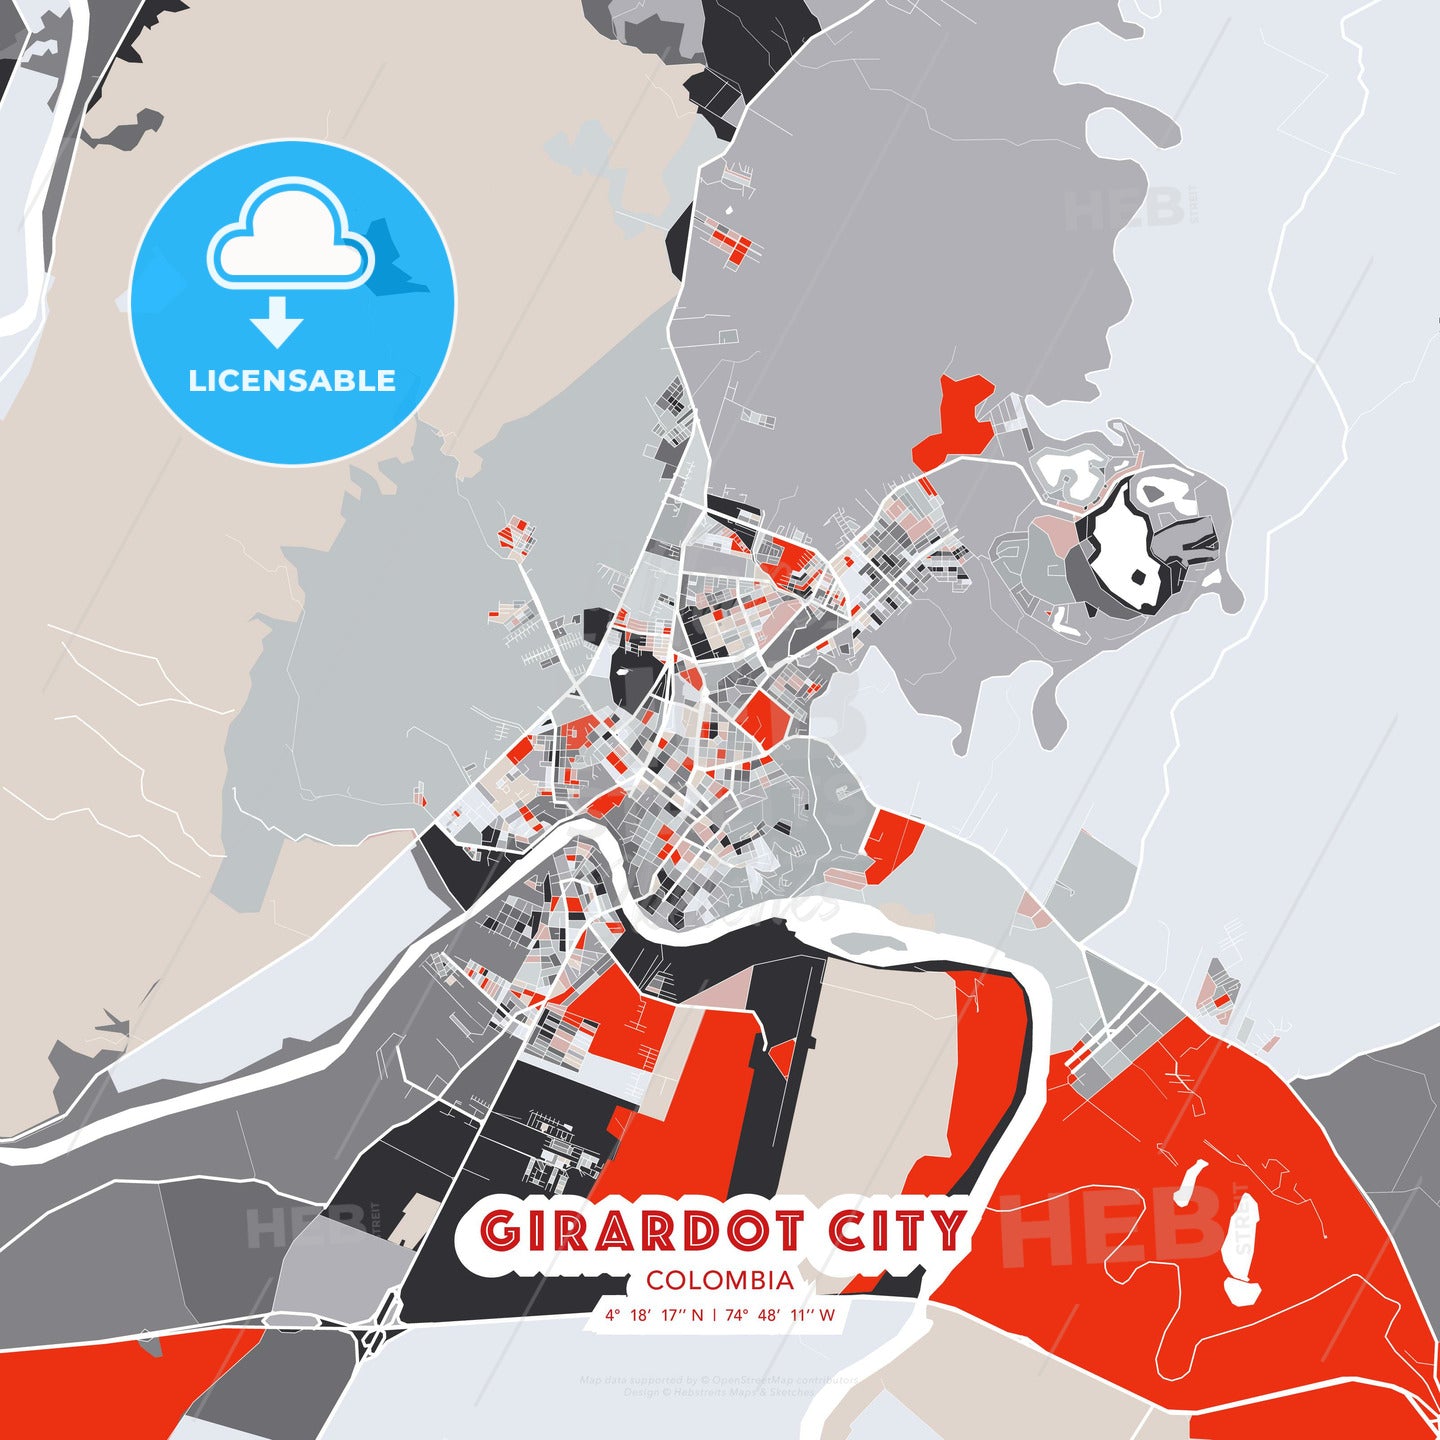 Girardot City, Colombia, modern map - HEBSTREITS Sketches